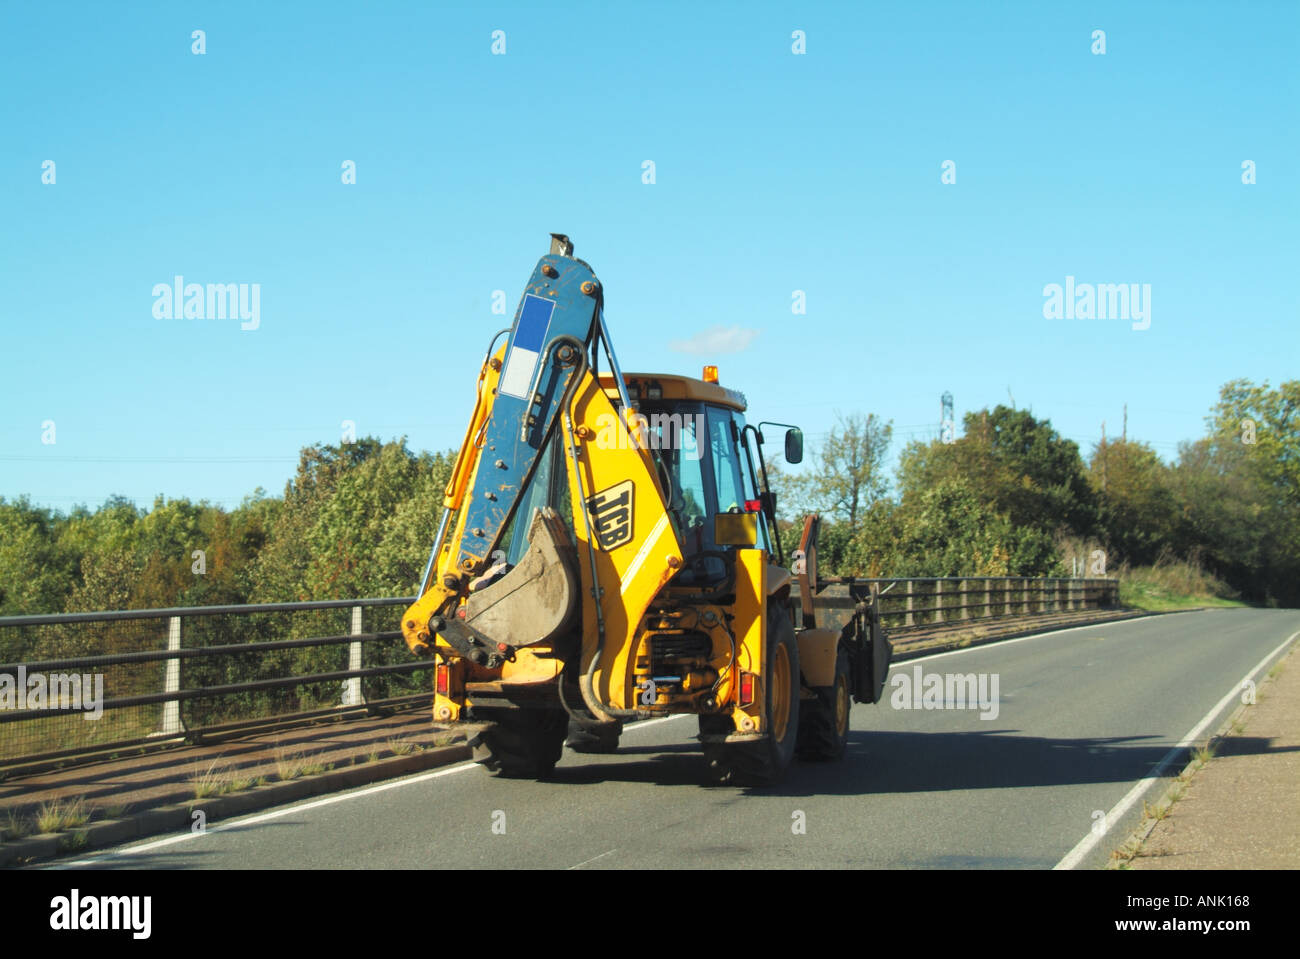 JCB hydraulic back actor excavator being driven along country road bridge hire company name digitally removed Stock Photo